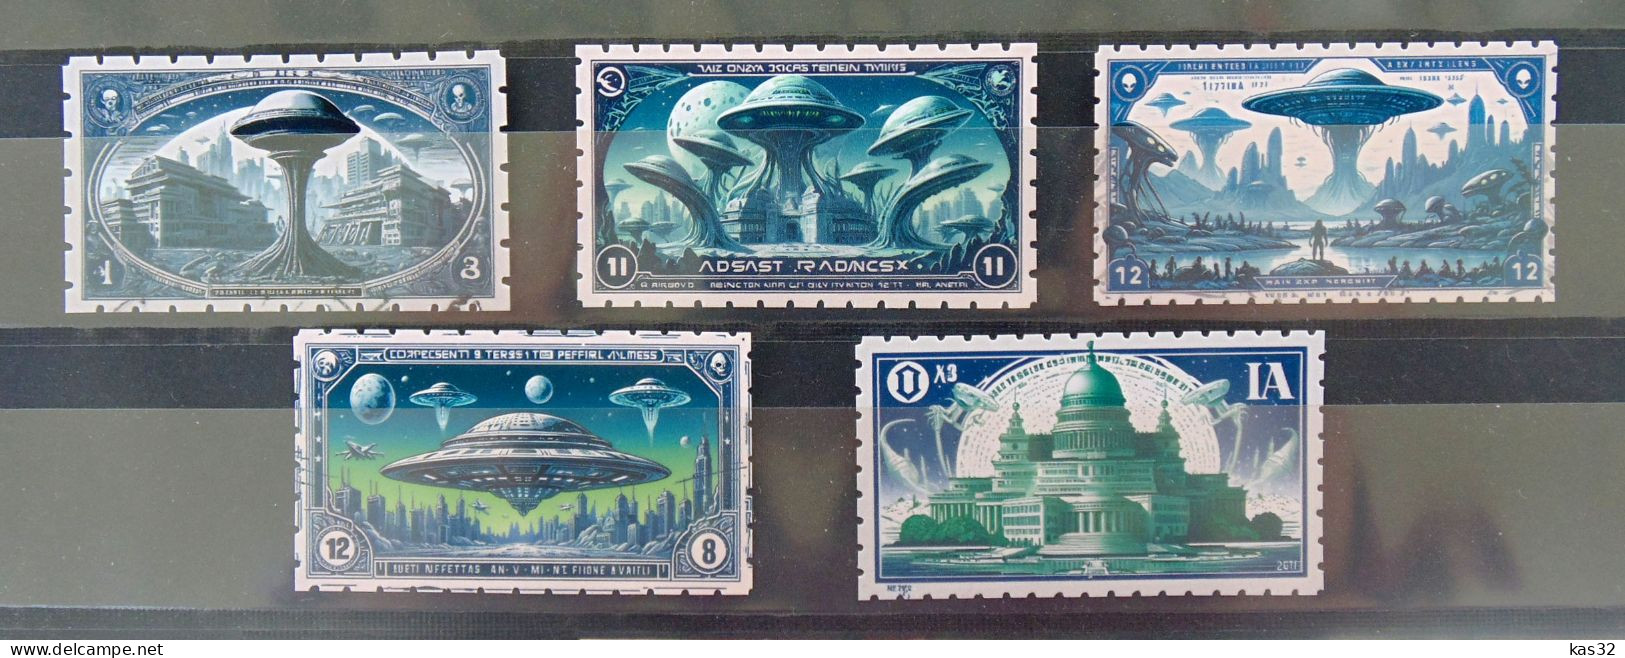 UFO, Alliens Stamps, Space, Aircraft, Lot 5, Some With Postmark - Fantacy Cinderella Stamps - Erinnofilia